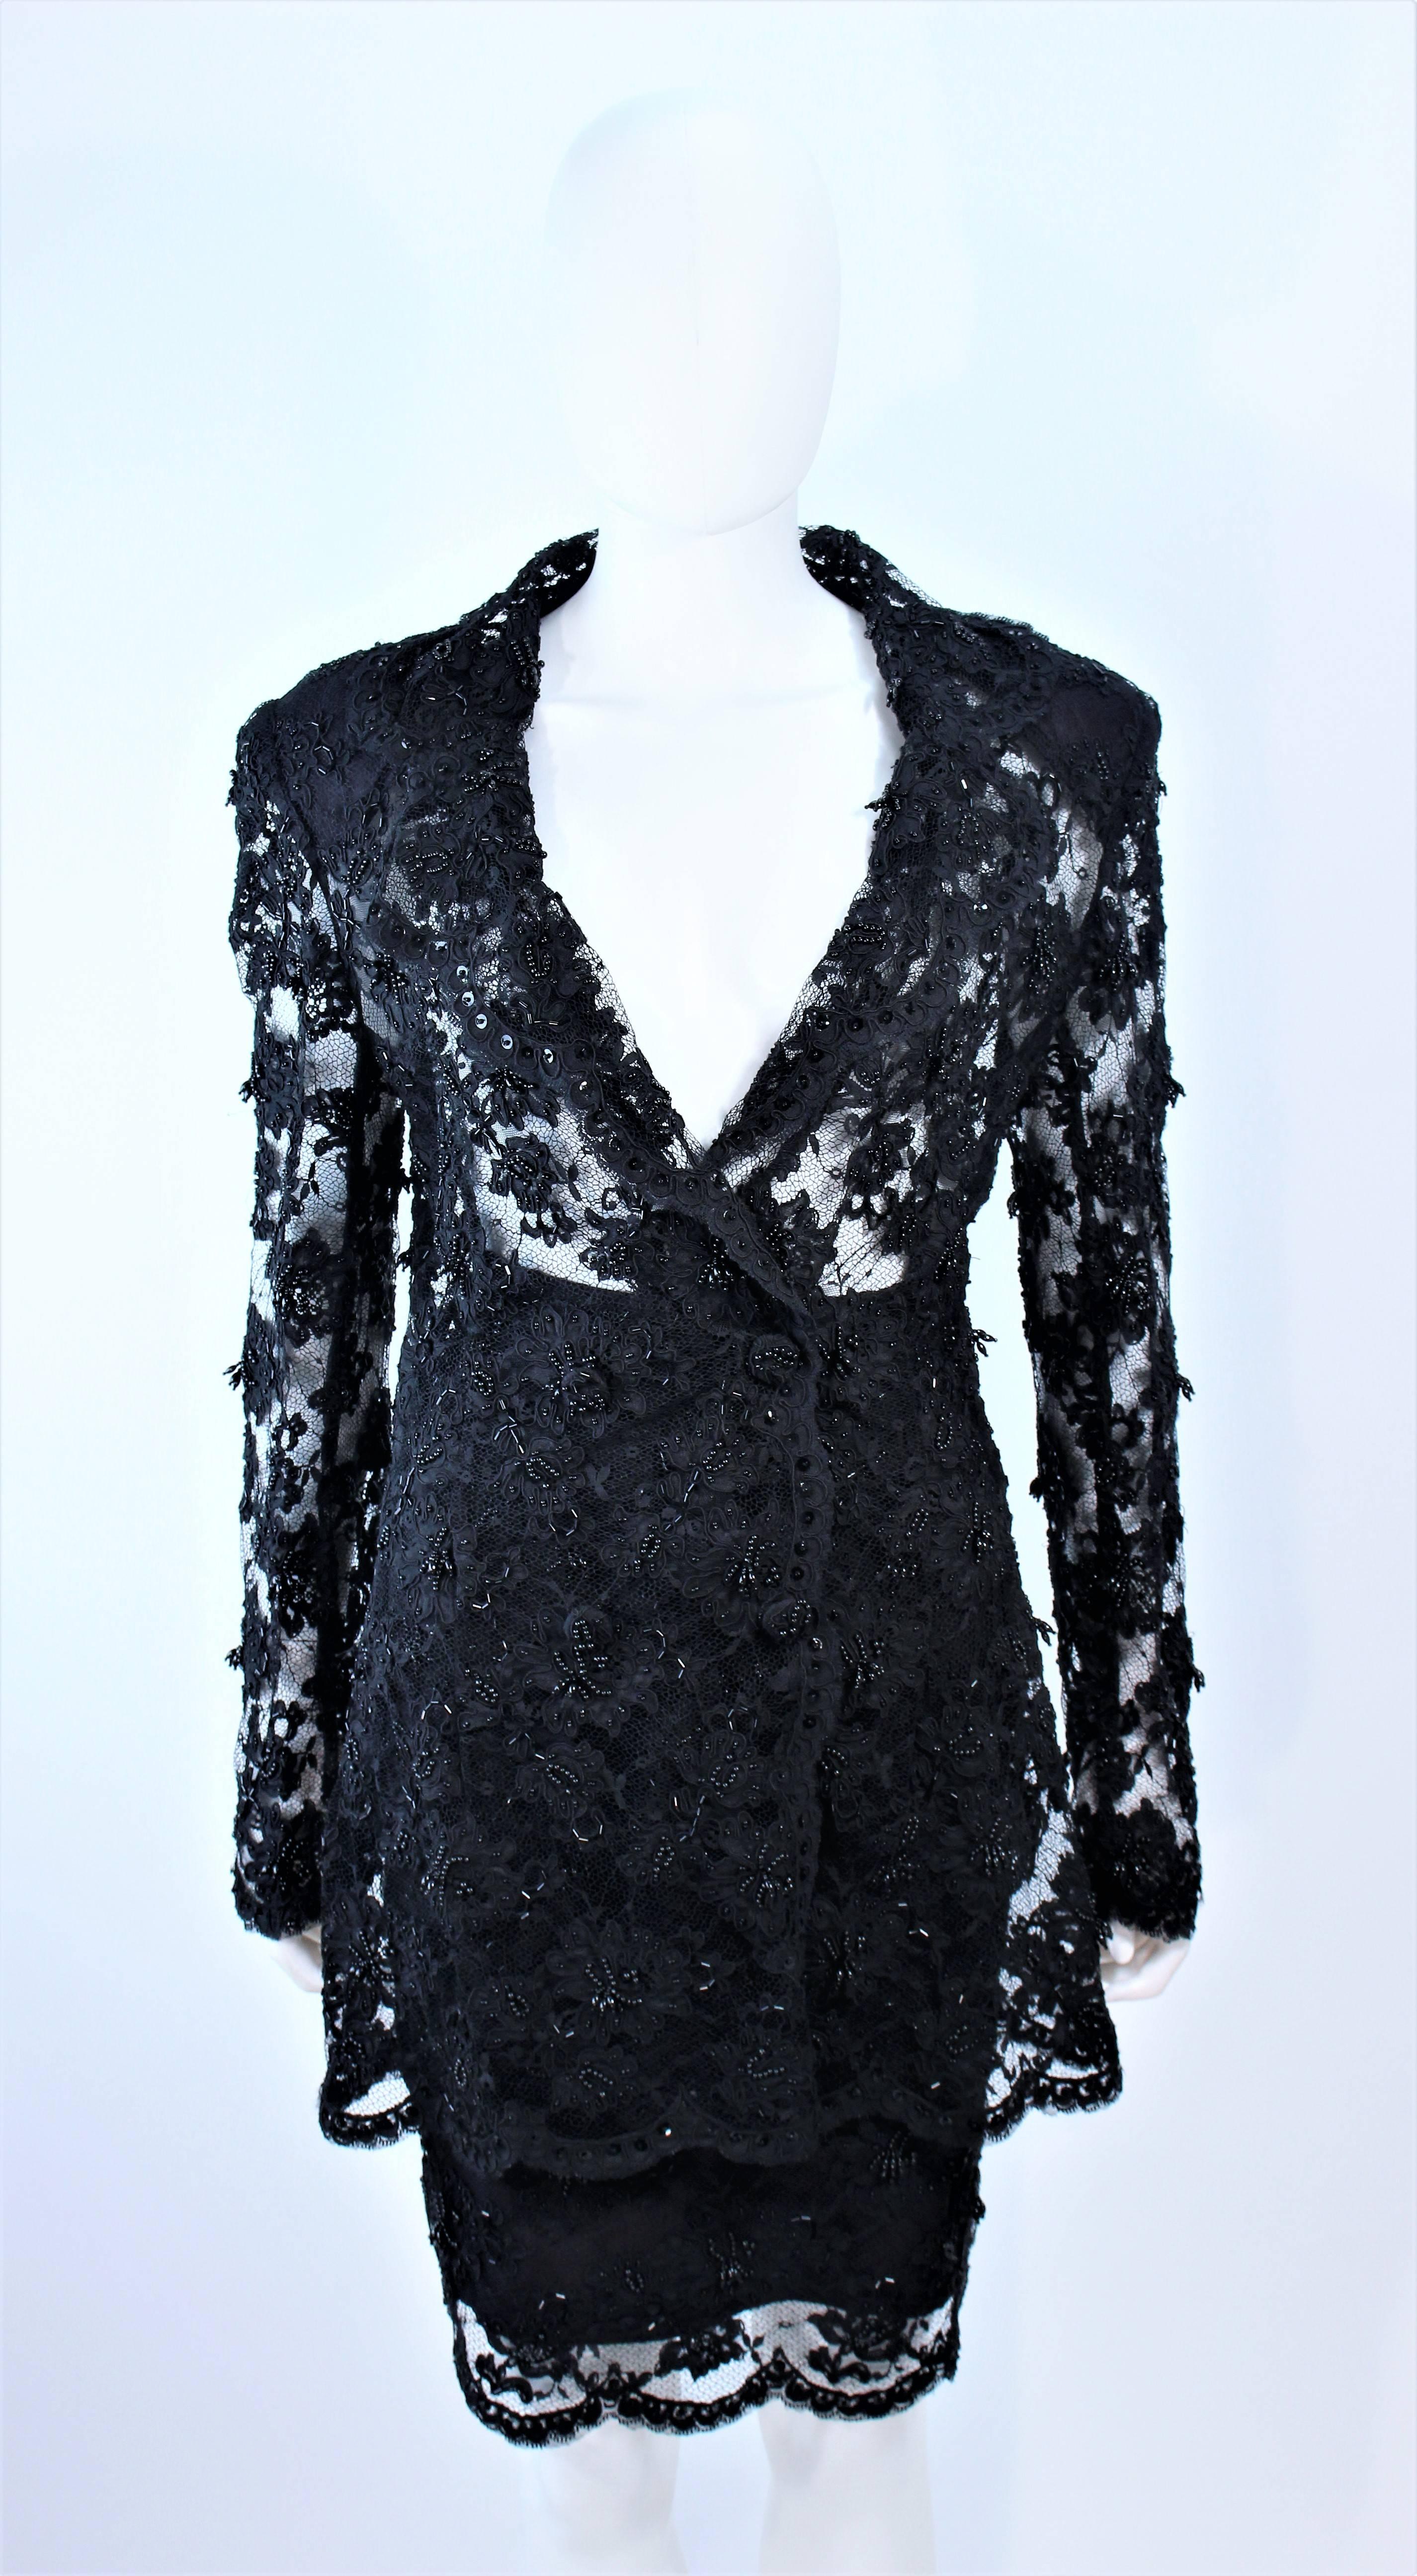 This Fetoun skirt suit is composed of beaded black lace. The jacket features a sheer design with center front snap closures The skirt has a classic pencil style with zipper closure. In excellent vintage condition.

**Please cross-reference